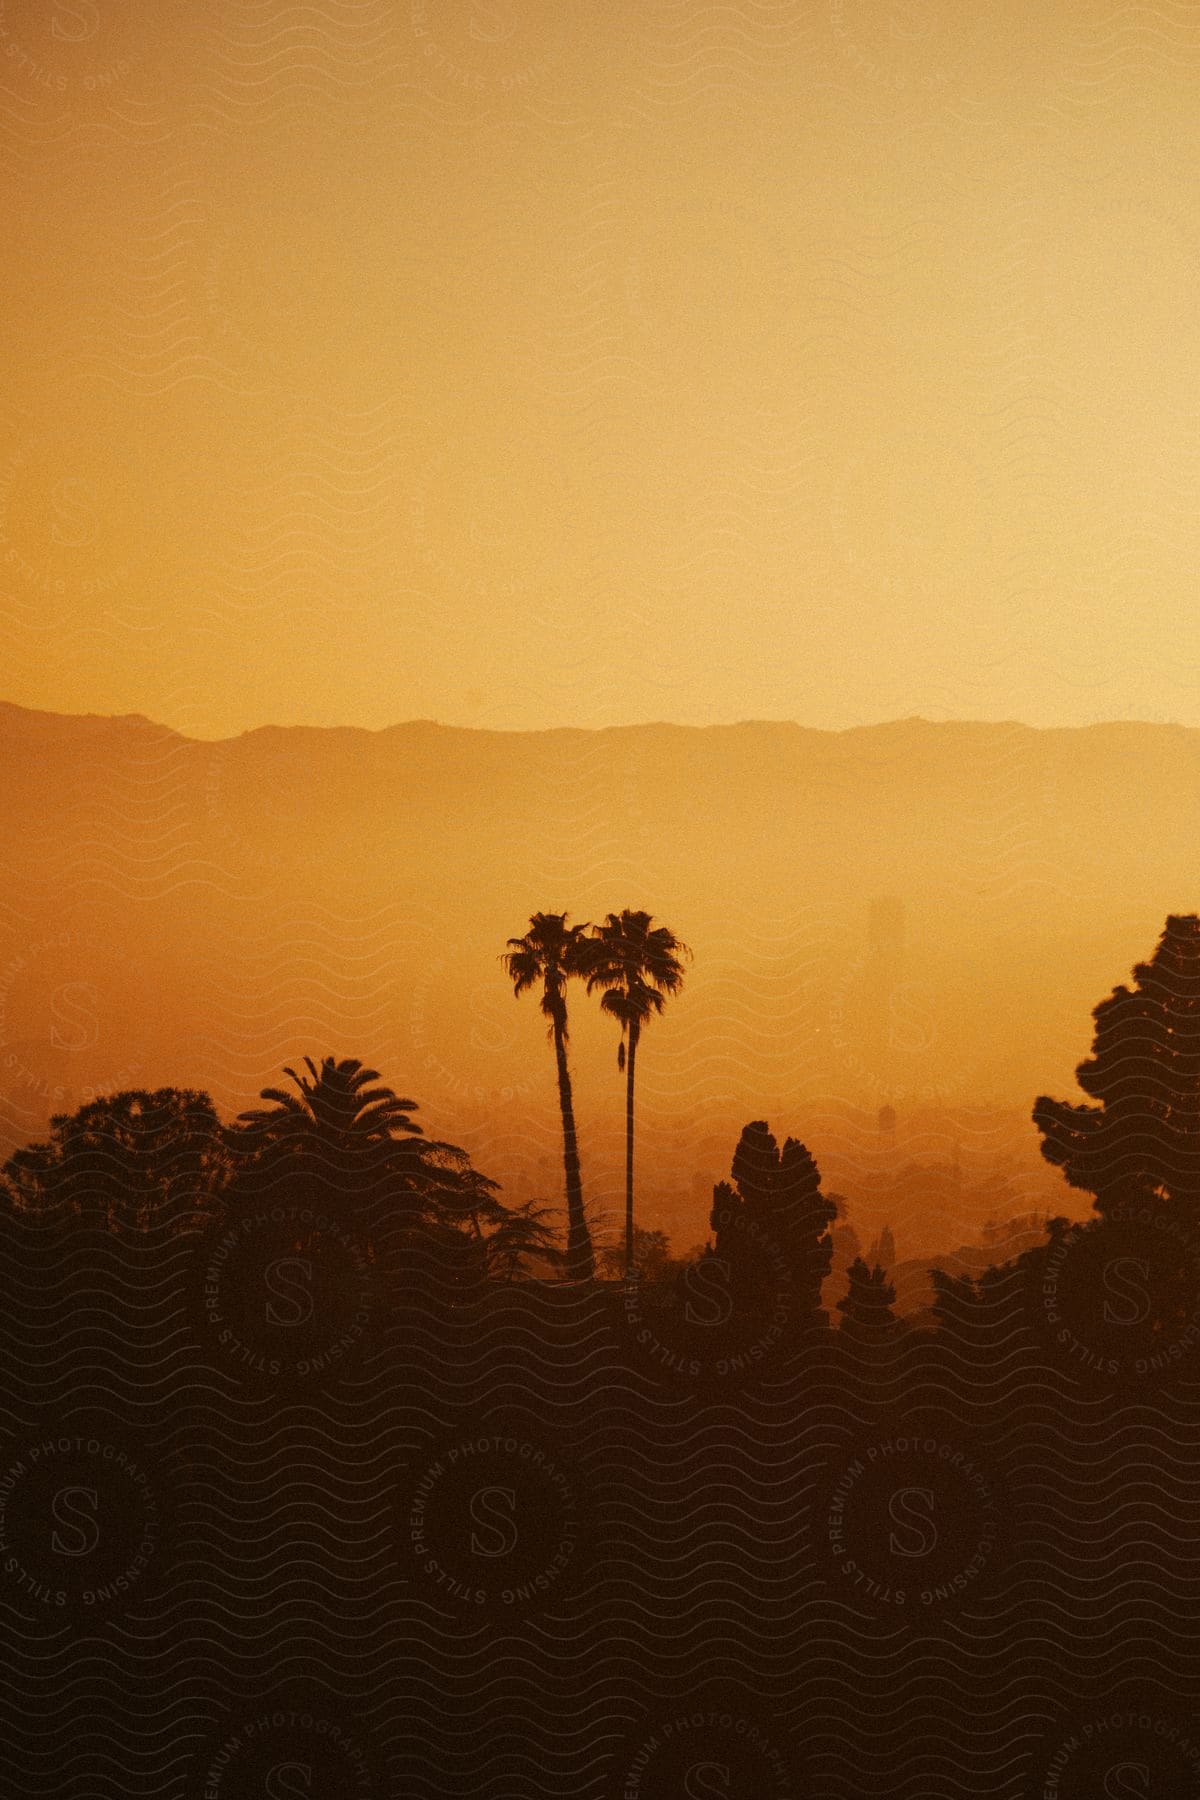 Two palm trees silhouetted against a yellow sky with other trees in the background